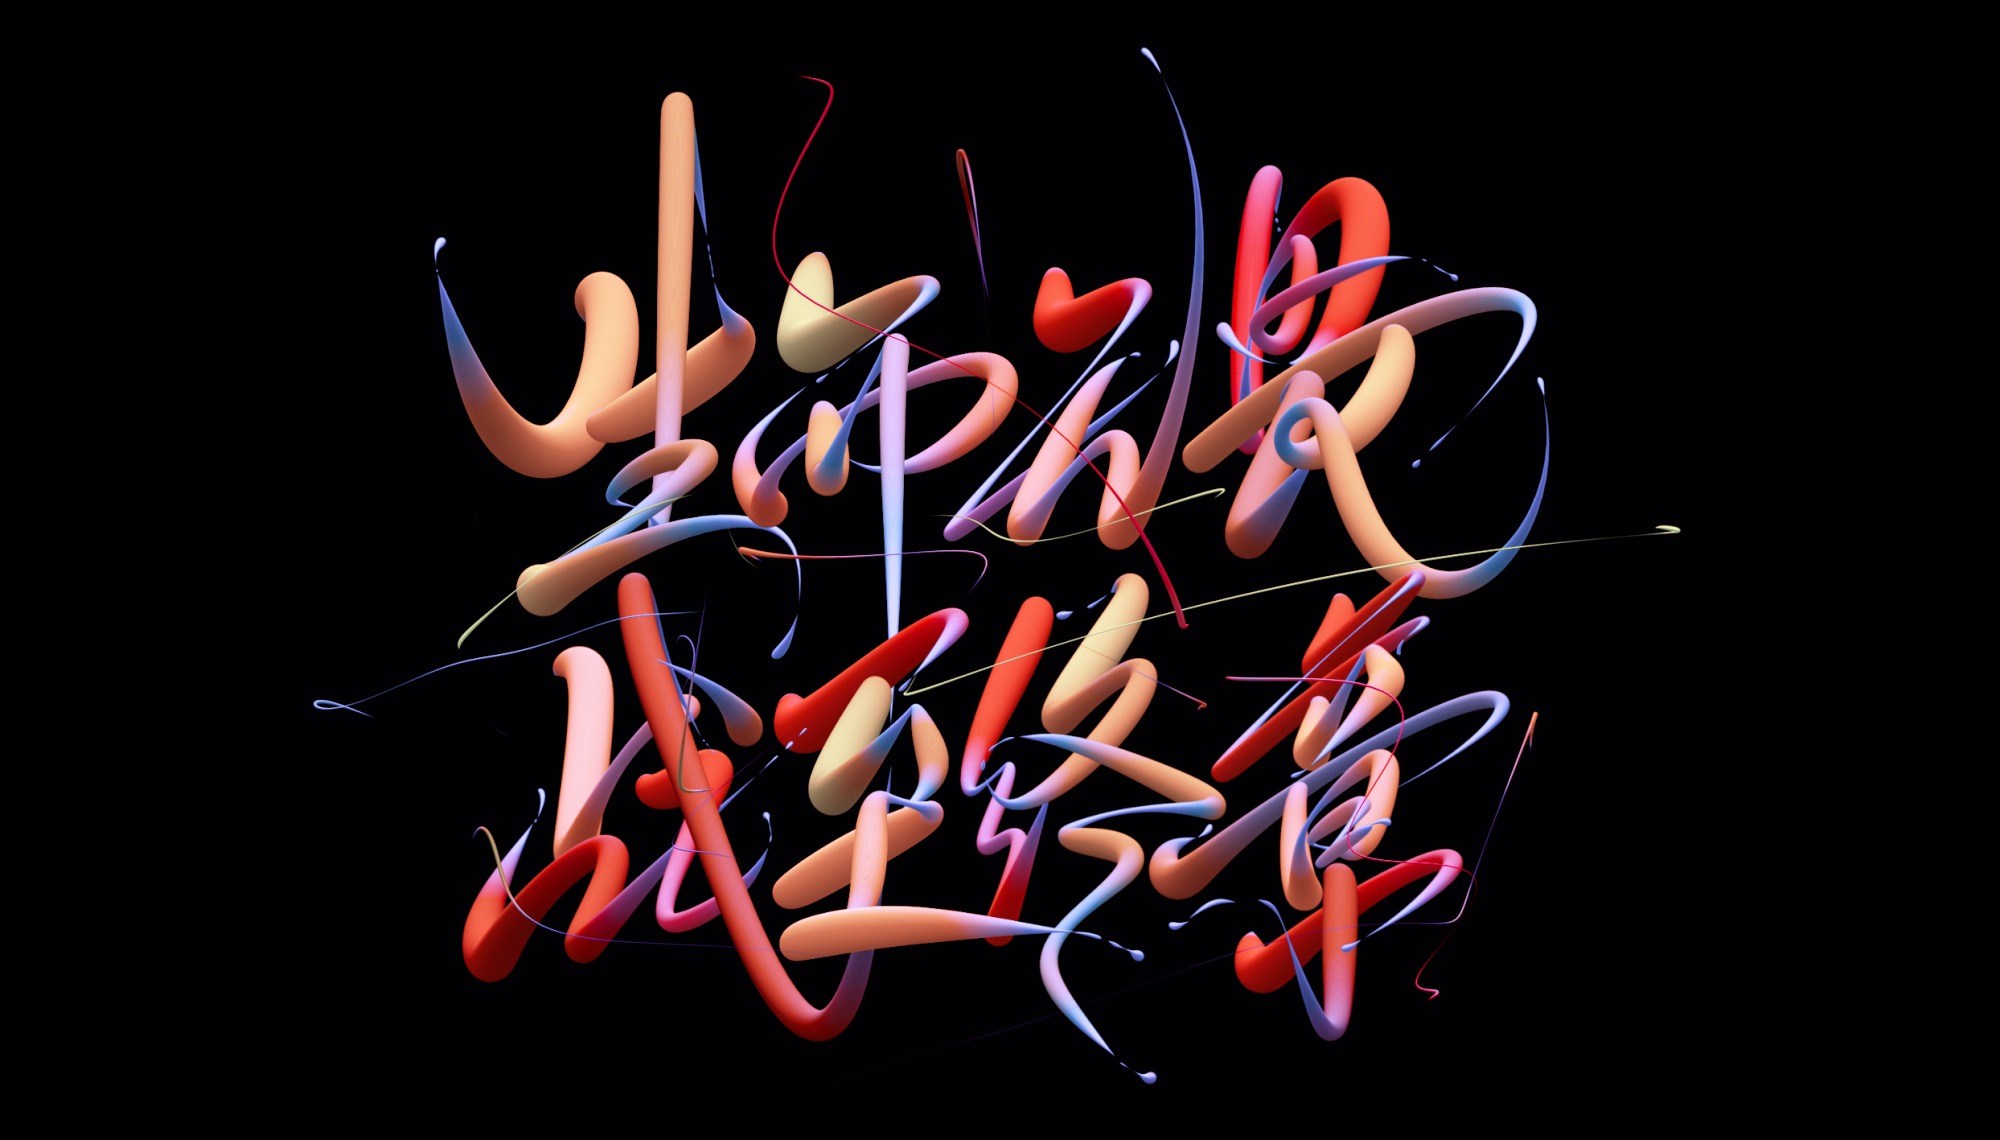 Creative font design with changeable colors